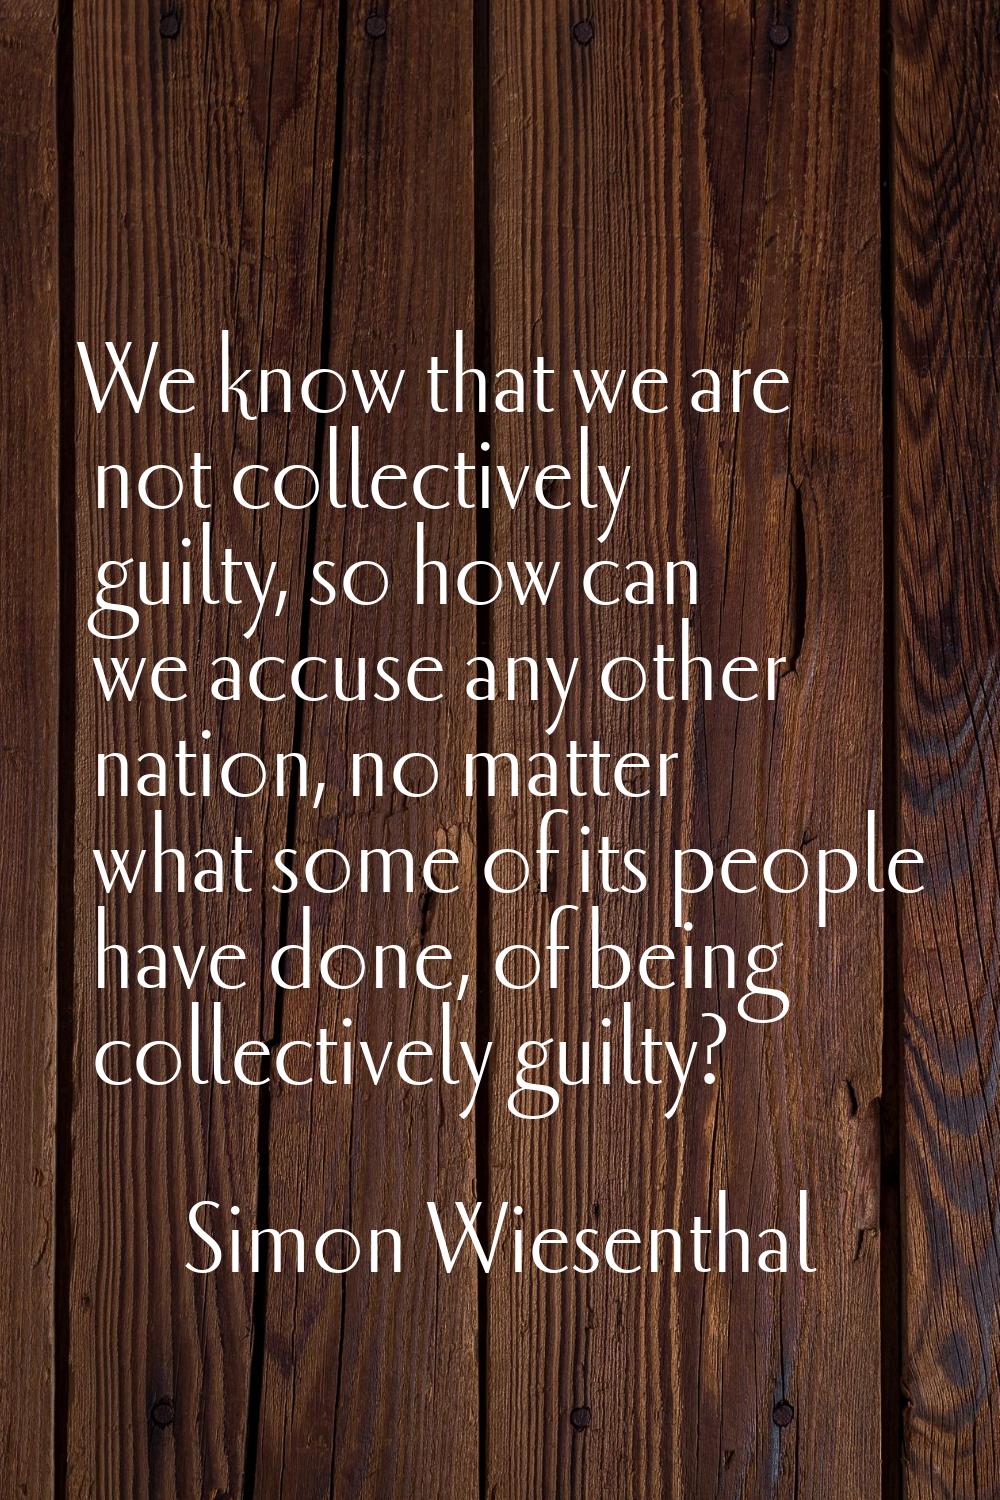 We know that we are not collectively guilty, so how can we accuse any other nation, no matter what 